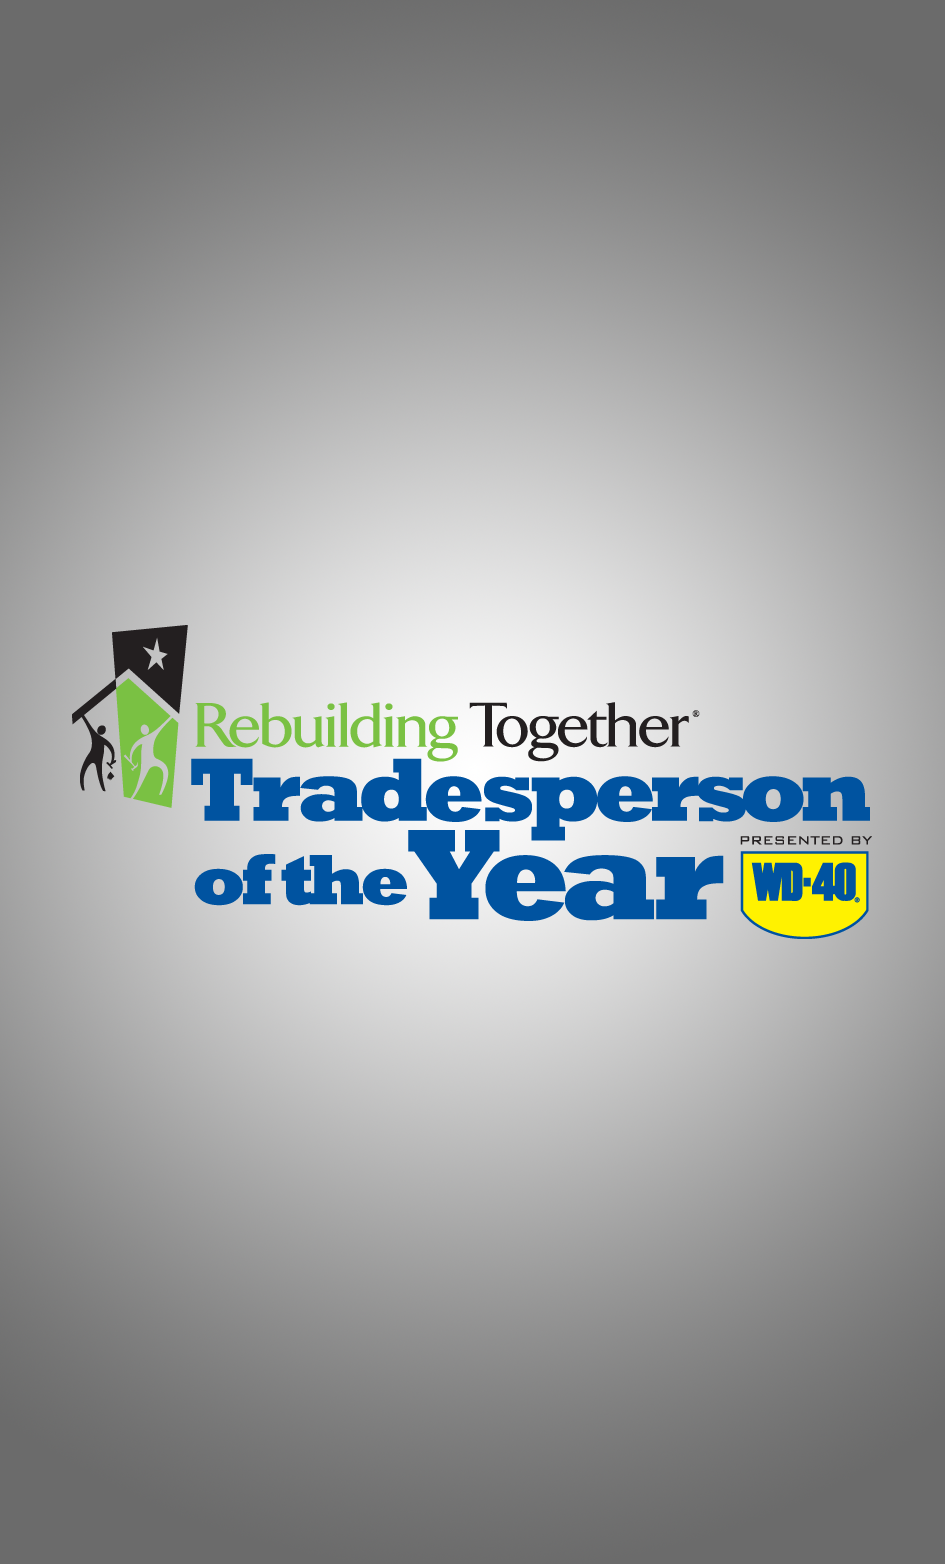 Rebuilding Together Tradesperson of the Year Contest, Presented by WD-40 Brand